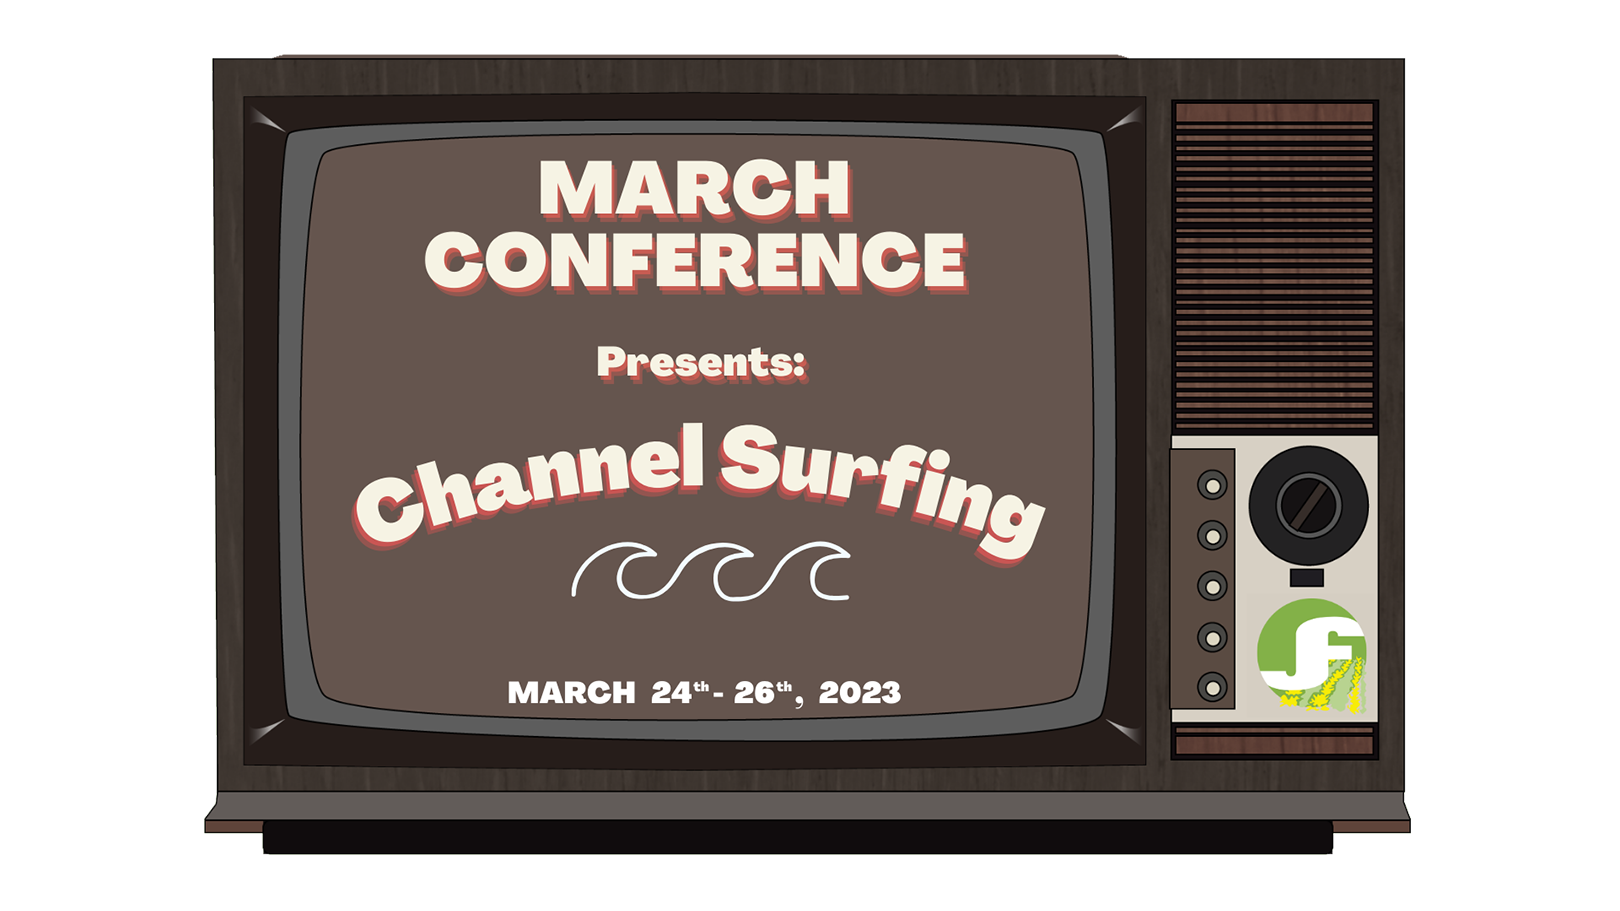 March Conference 2023 - Channel Surfing